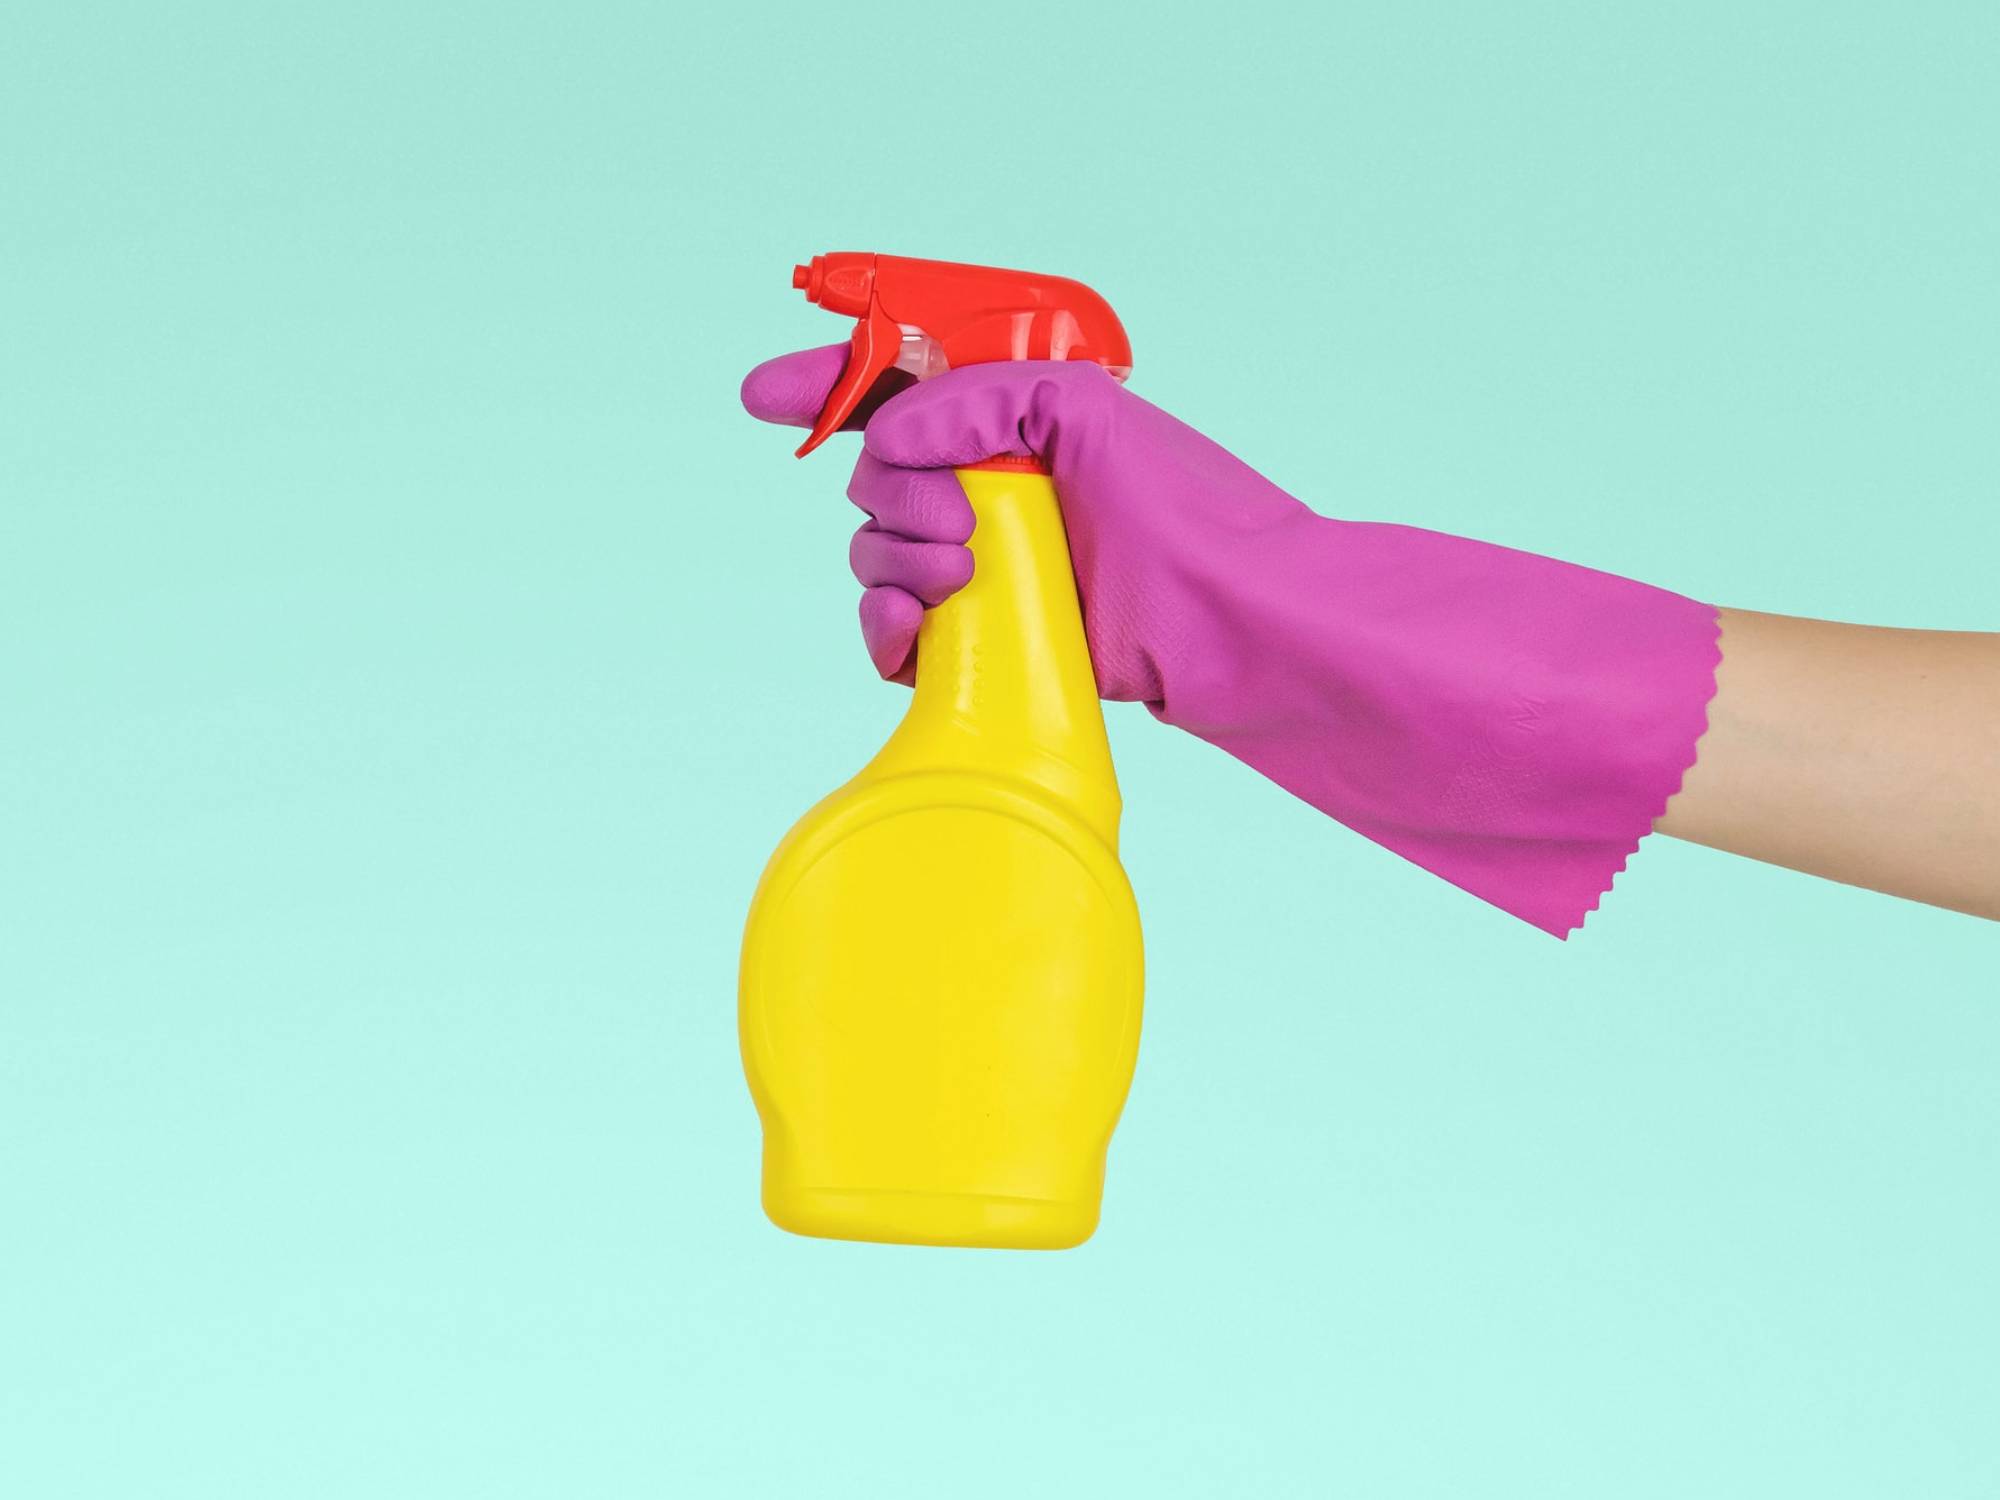 Master odor removal with a little help from science | Popular Science